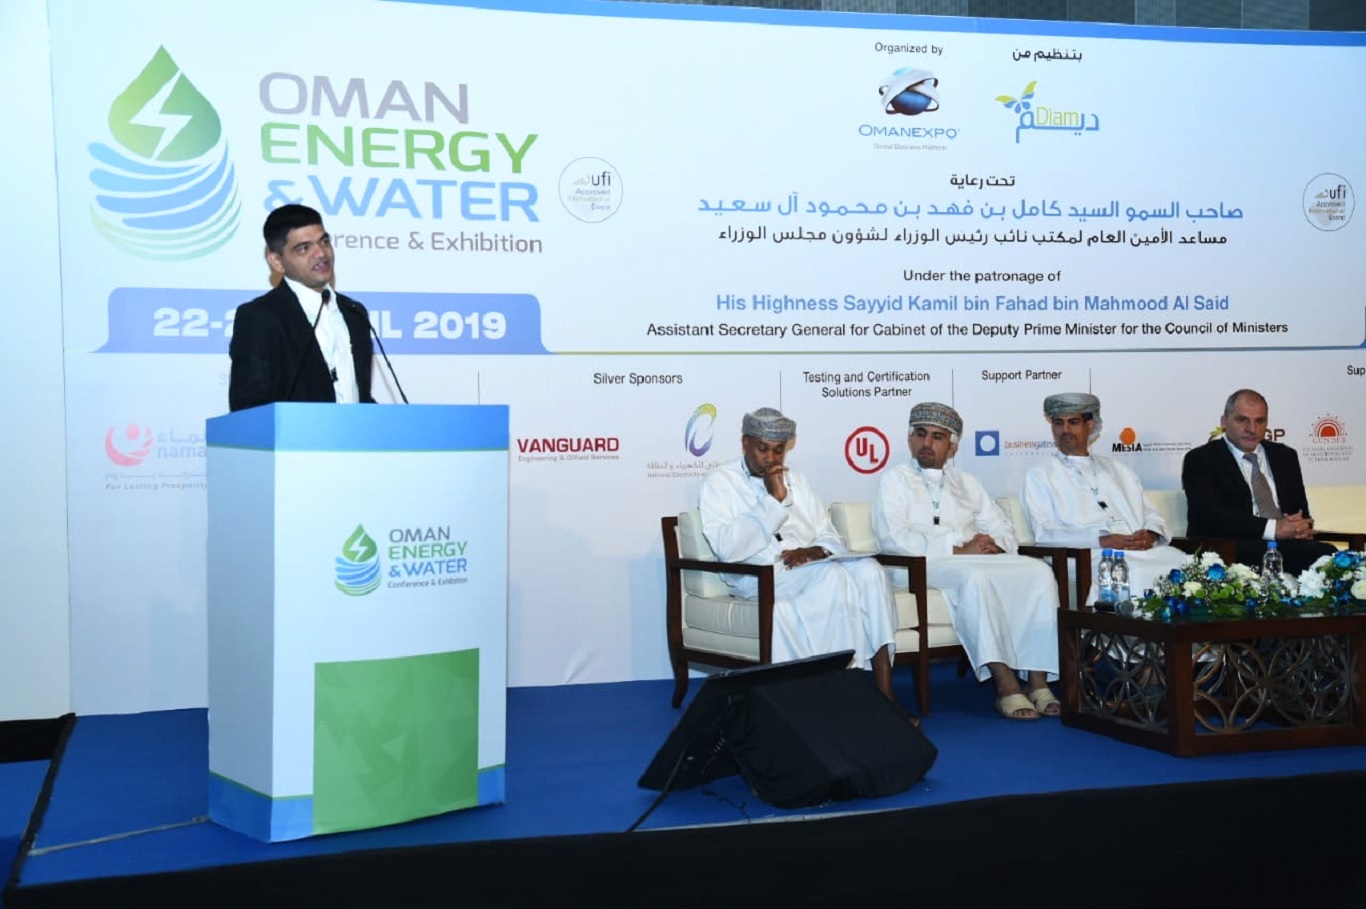 Greenovative stands delighted to represent next-gen energy efficient digital innovations at Oman Energy & Water Exhibition 2019